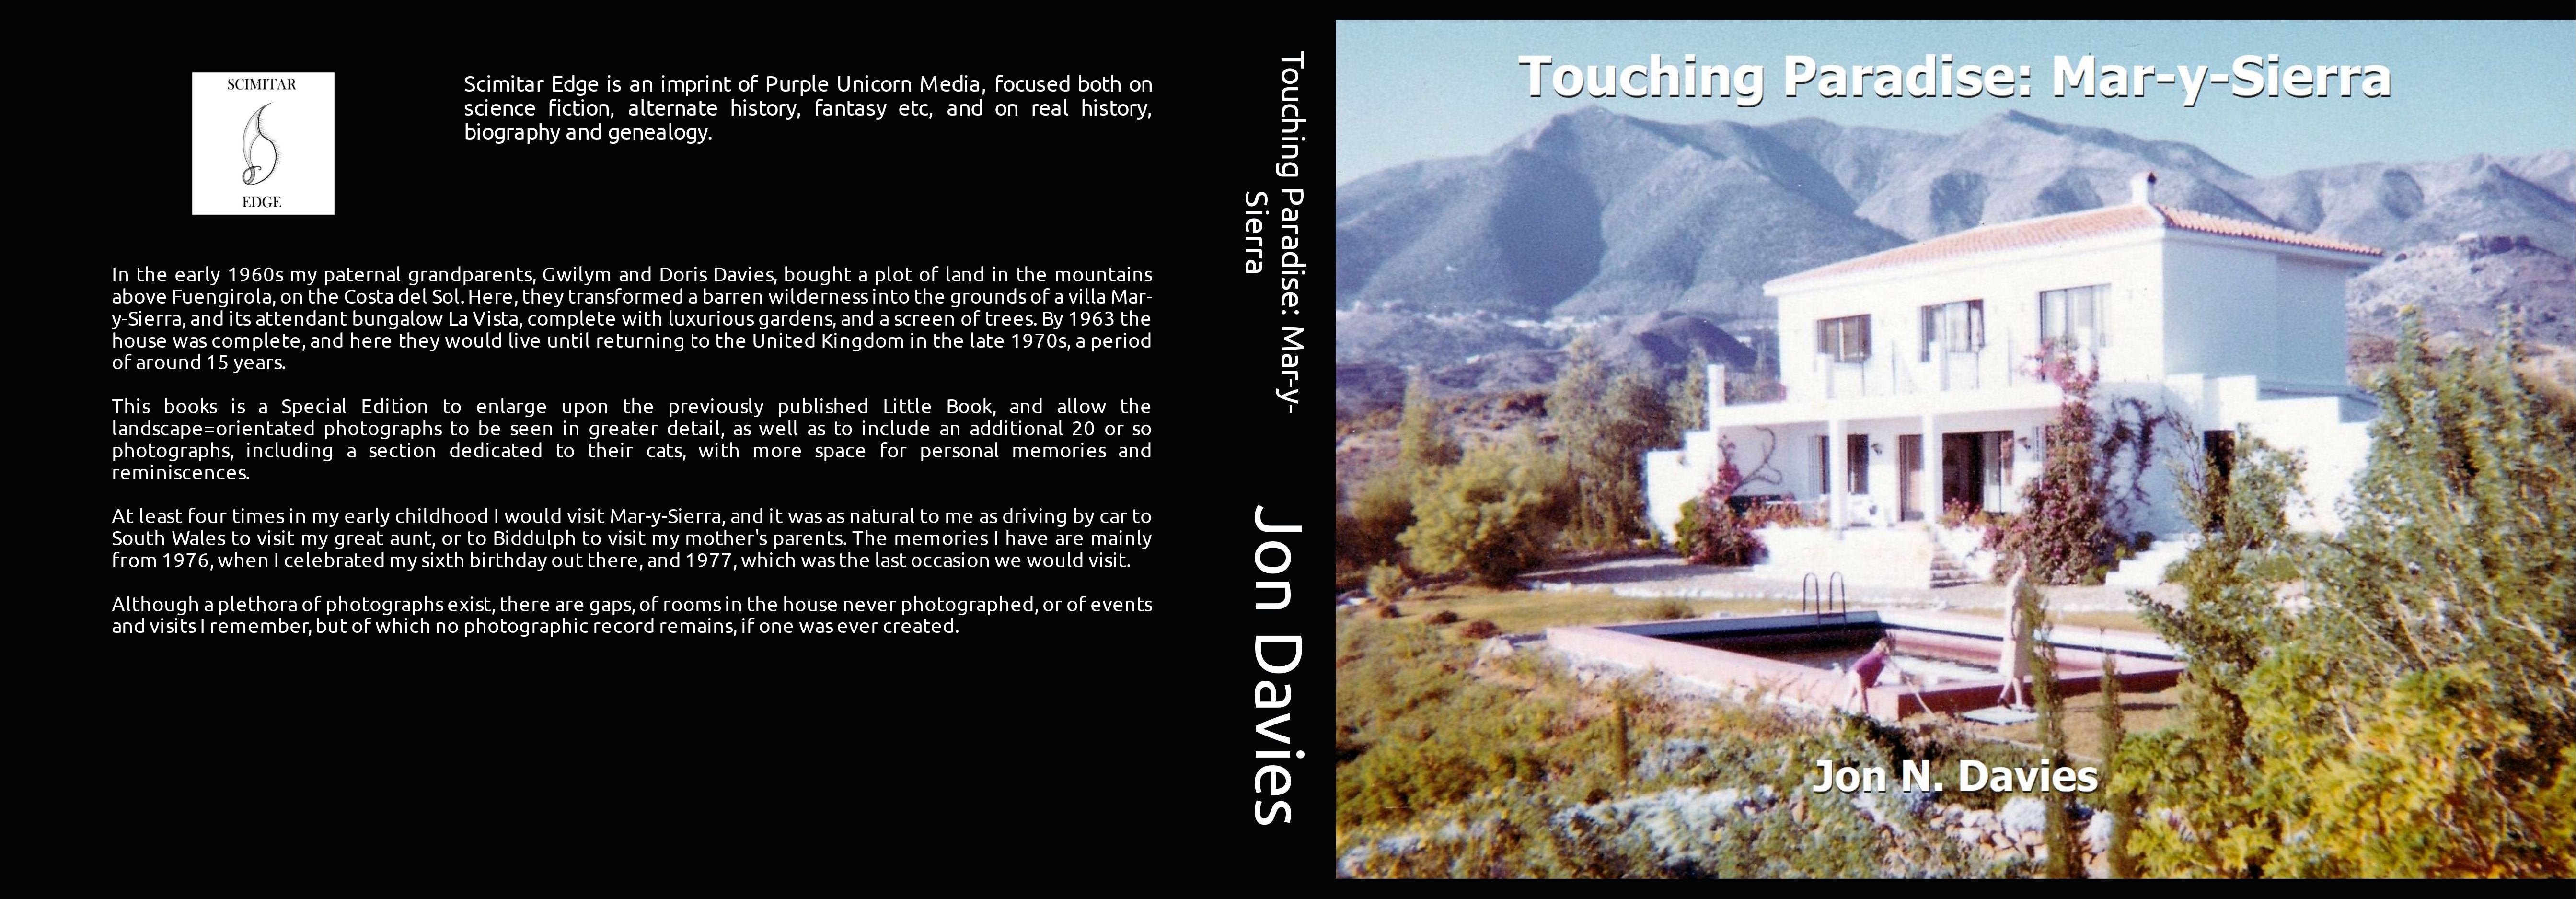 Full cover of the special edition of Touching Paradise